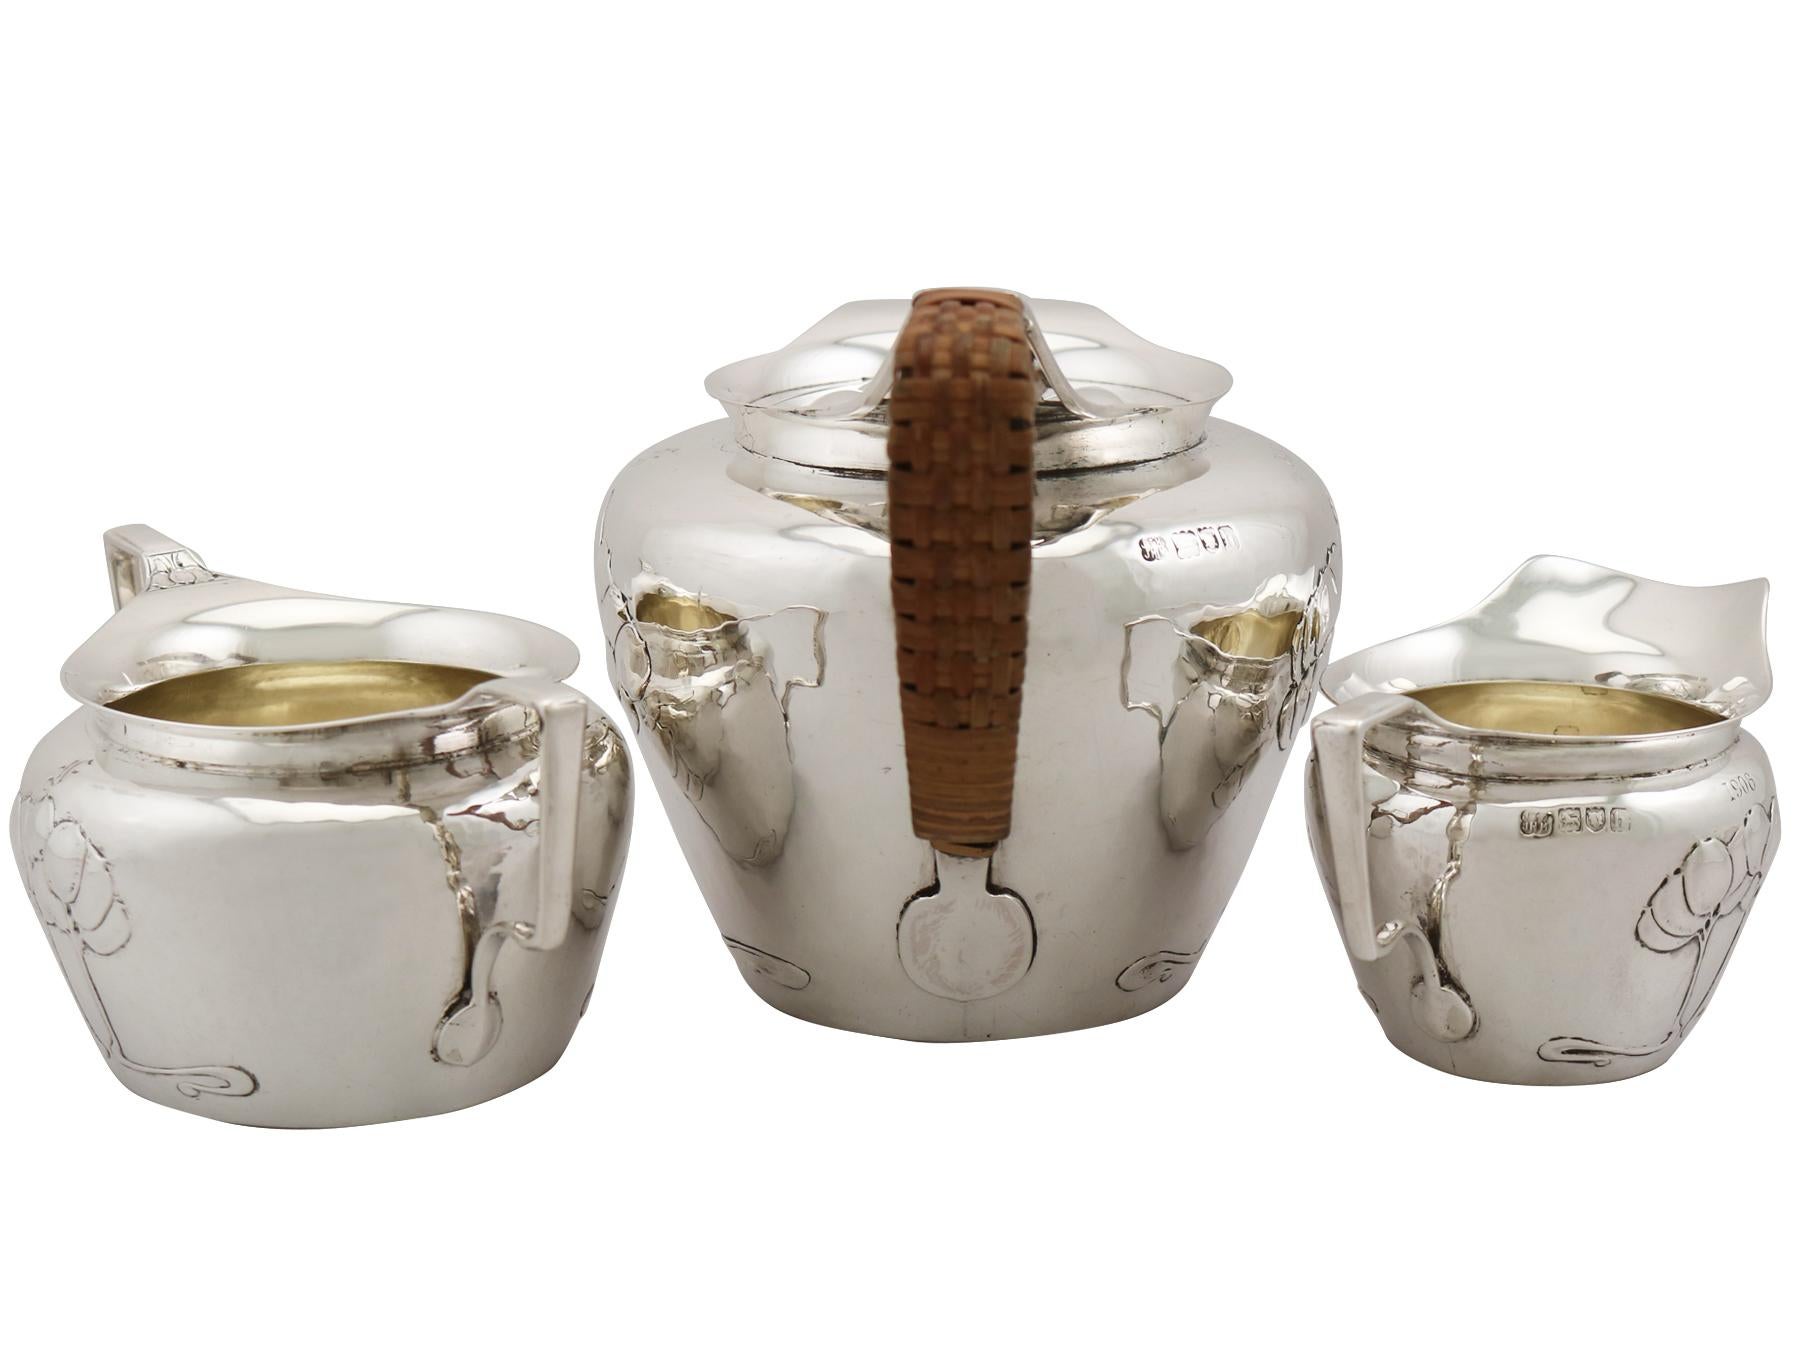 An exceptional, fine and impressive, unusual antique Edwardian English sterling silver three piece tea service in the Art Nouveau style; an addition to our antique teaware collection.

This exceptional antique Edwardian sterling silver three piece